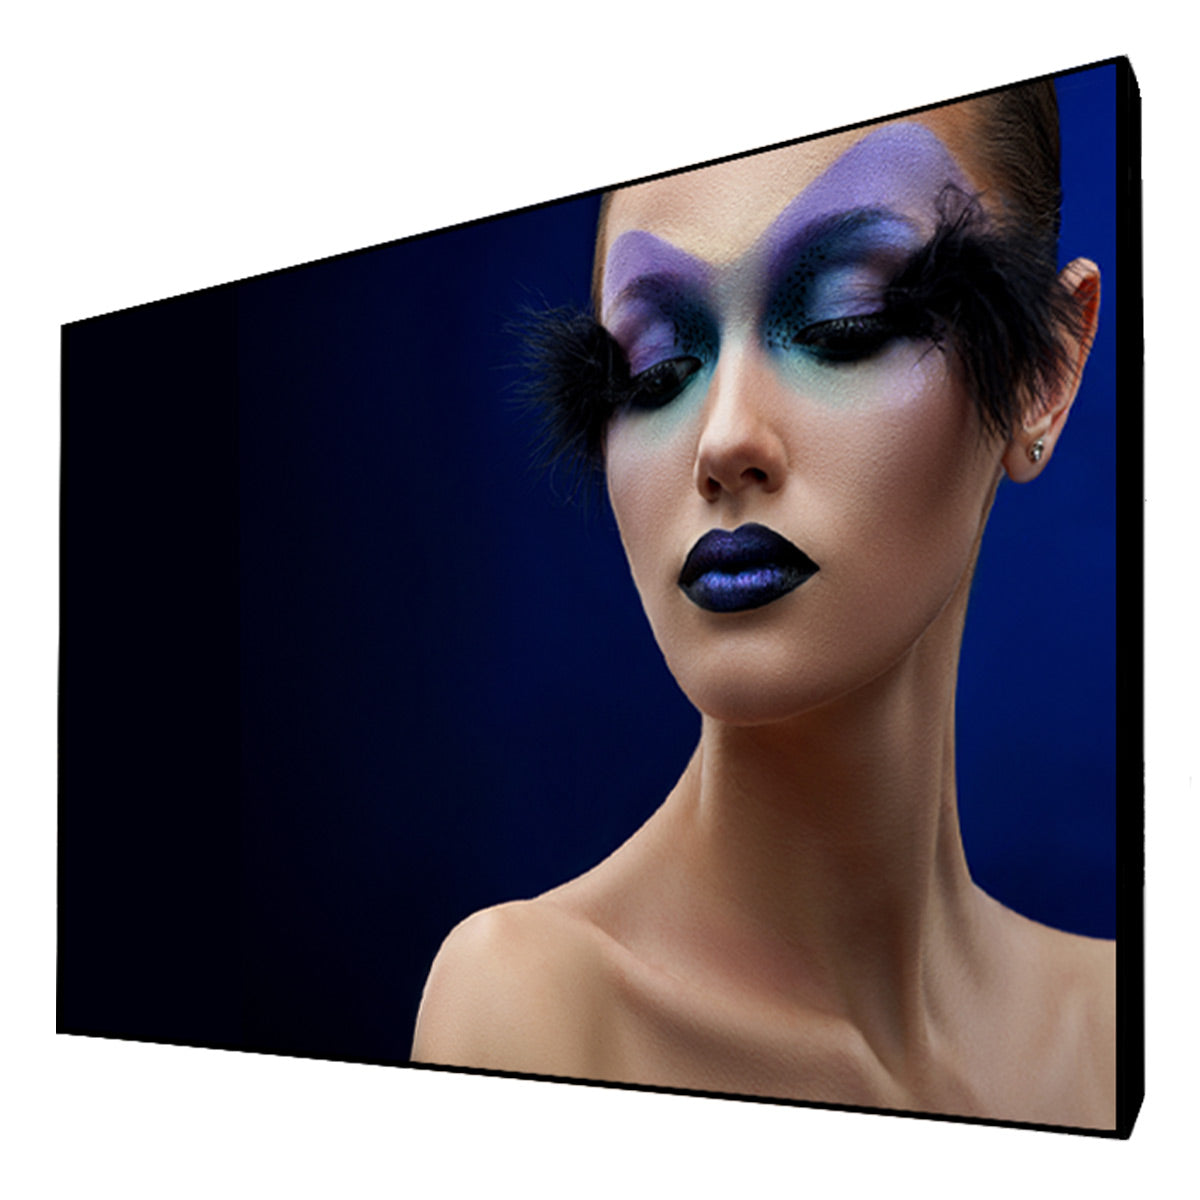 Stewart Balón Edge Fixed Frame 120" HDTV Projector Screen with Ambient Light Rejection (FireHawk G5)